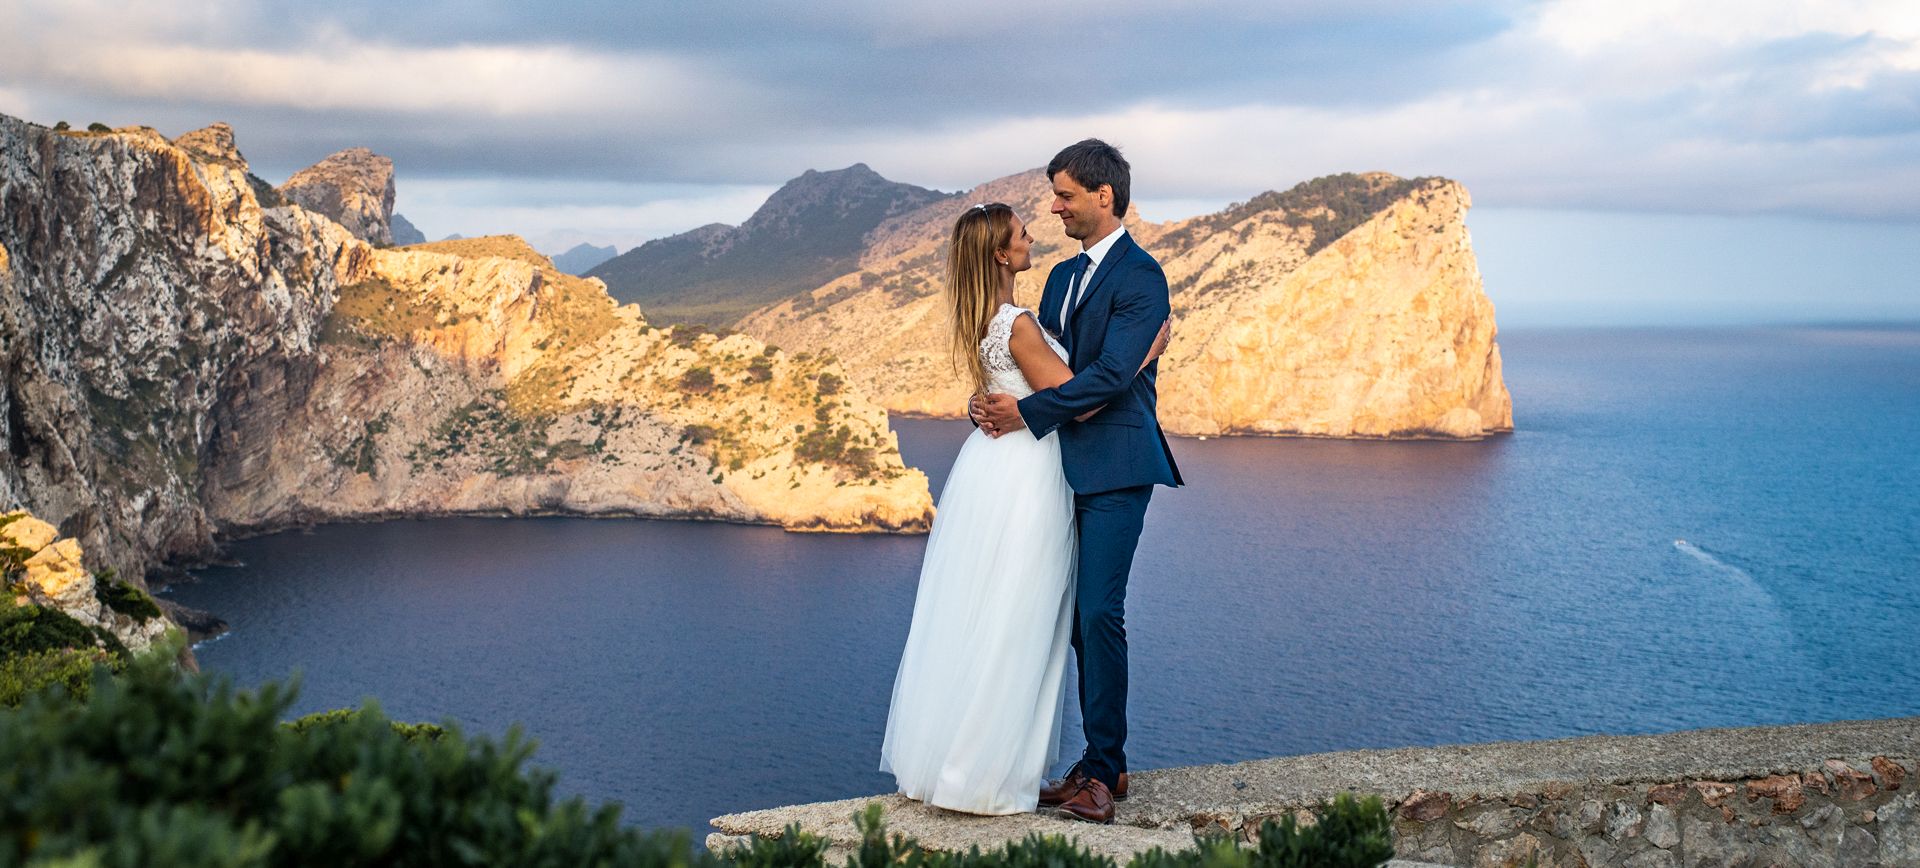 mallorca beach elopement in cap formentor - bride and groom enyjoing their mallorca elopement package